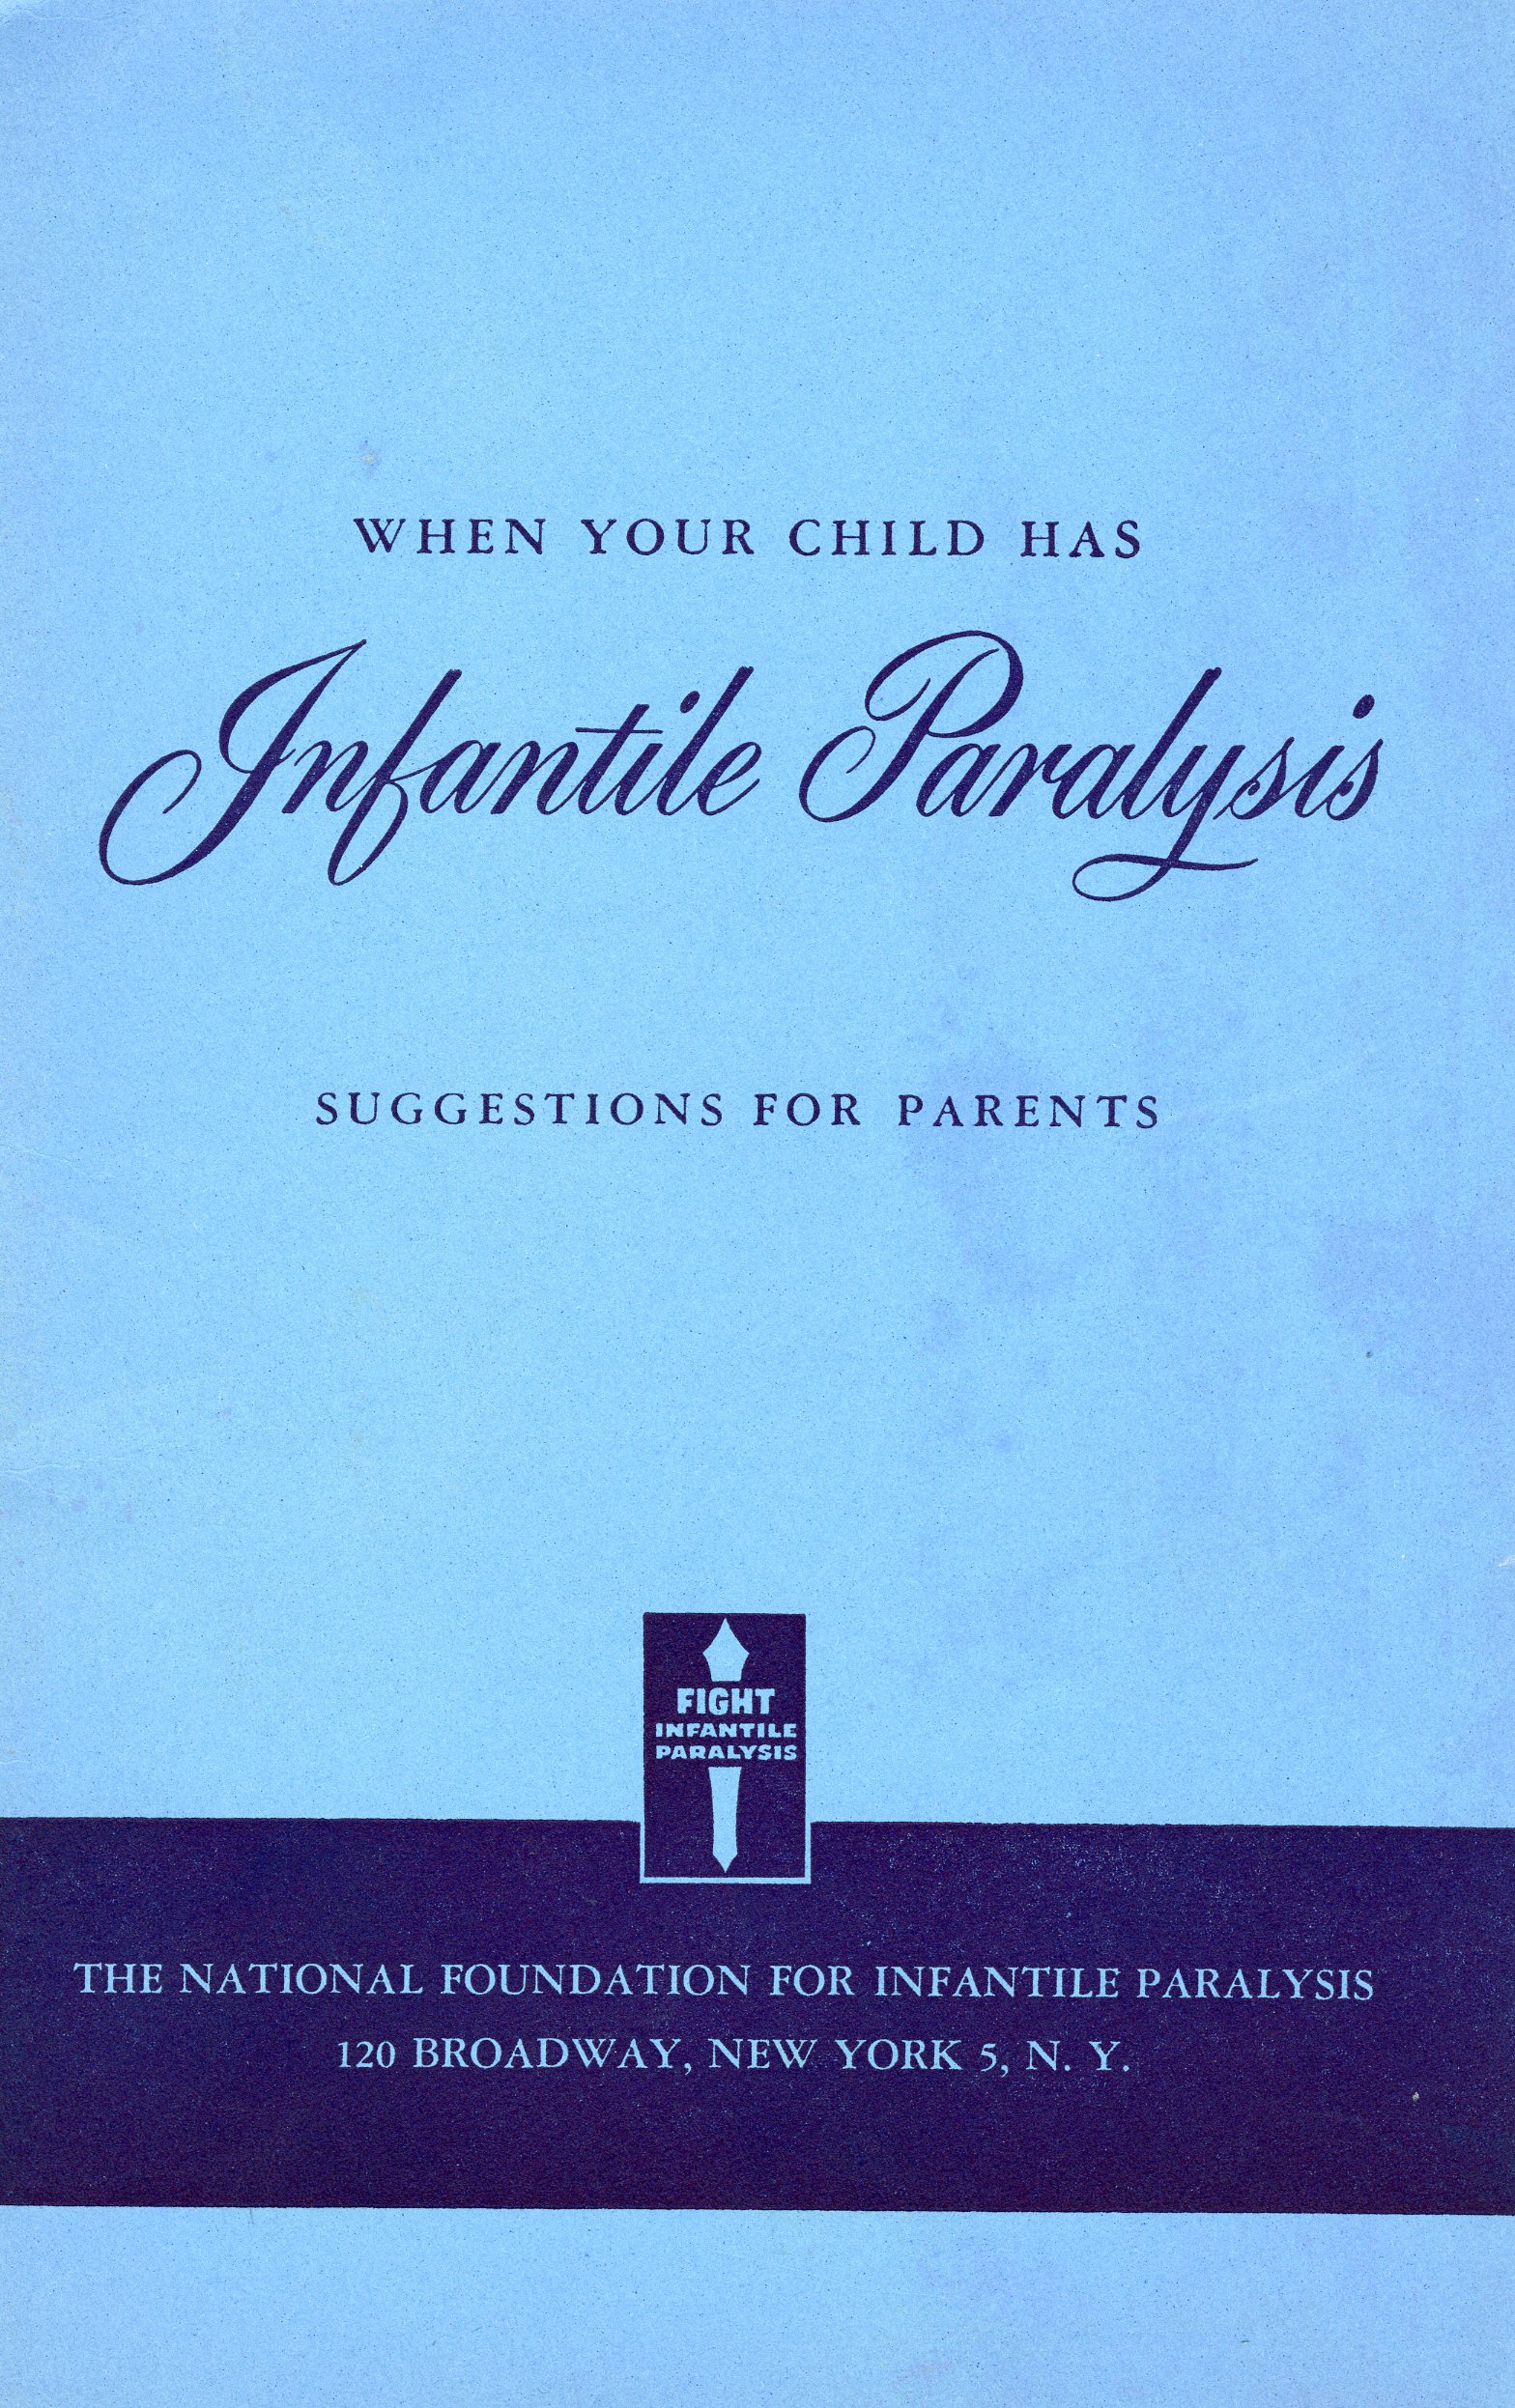 Interior Pages from When Your Child has Infantile Paralysis: Suggestions for Parents